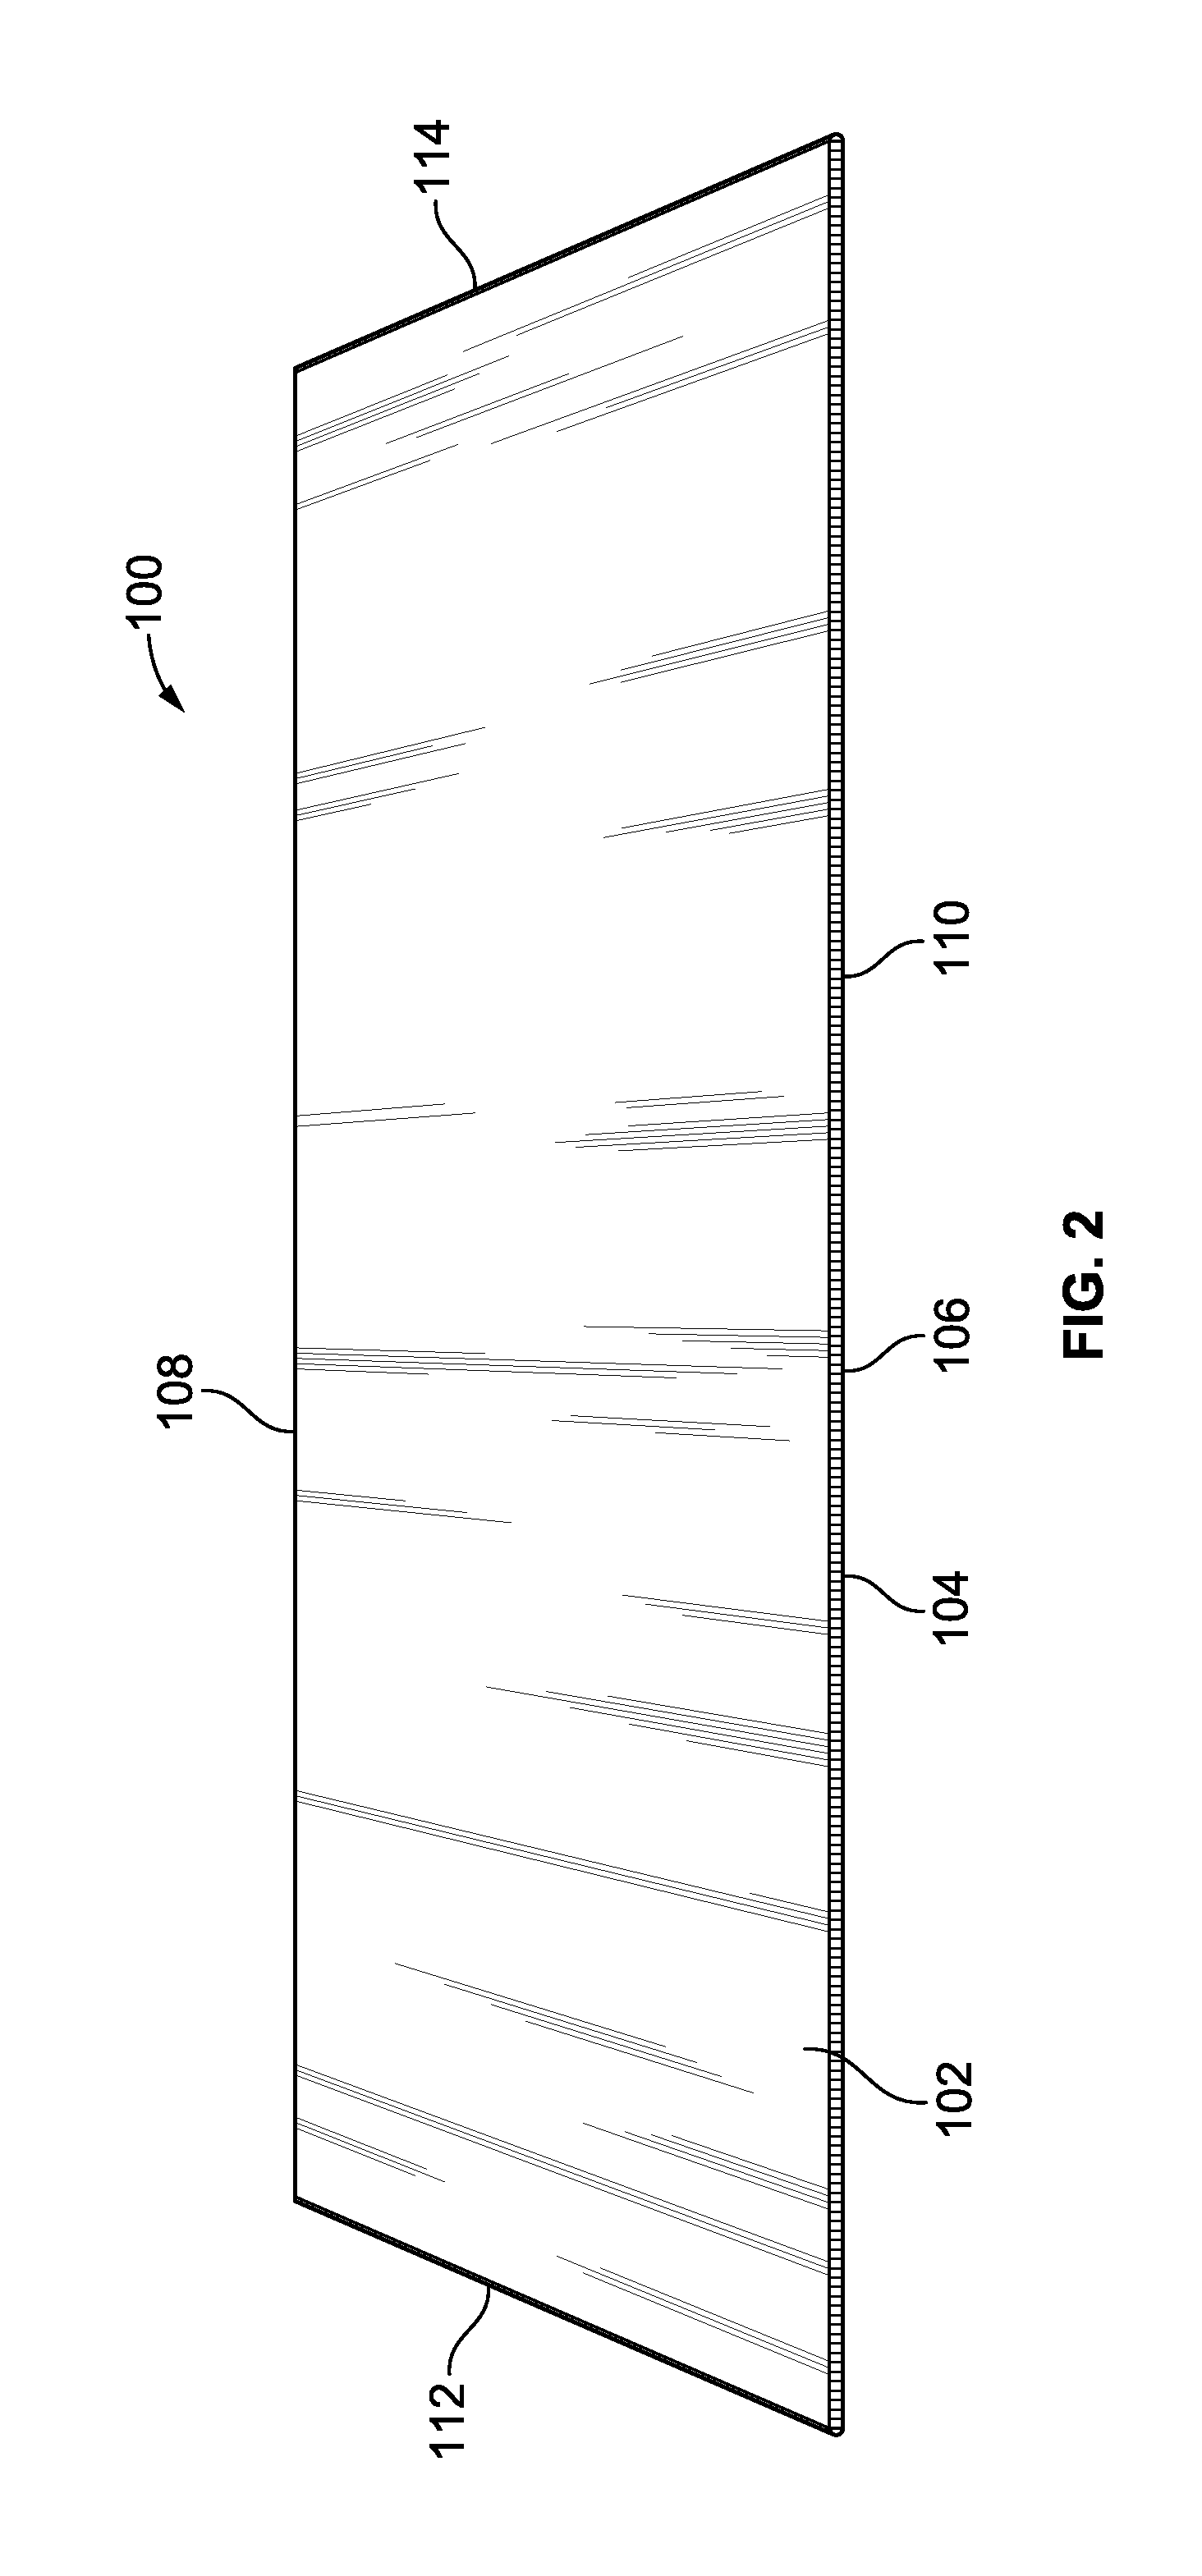 Process for Forming Plastic Corrugated Container and Intermediary Blank